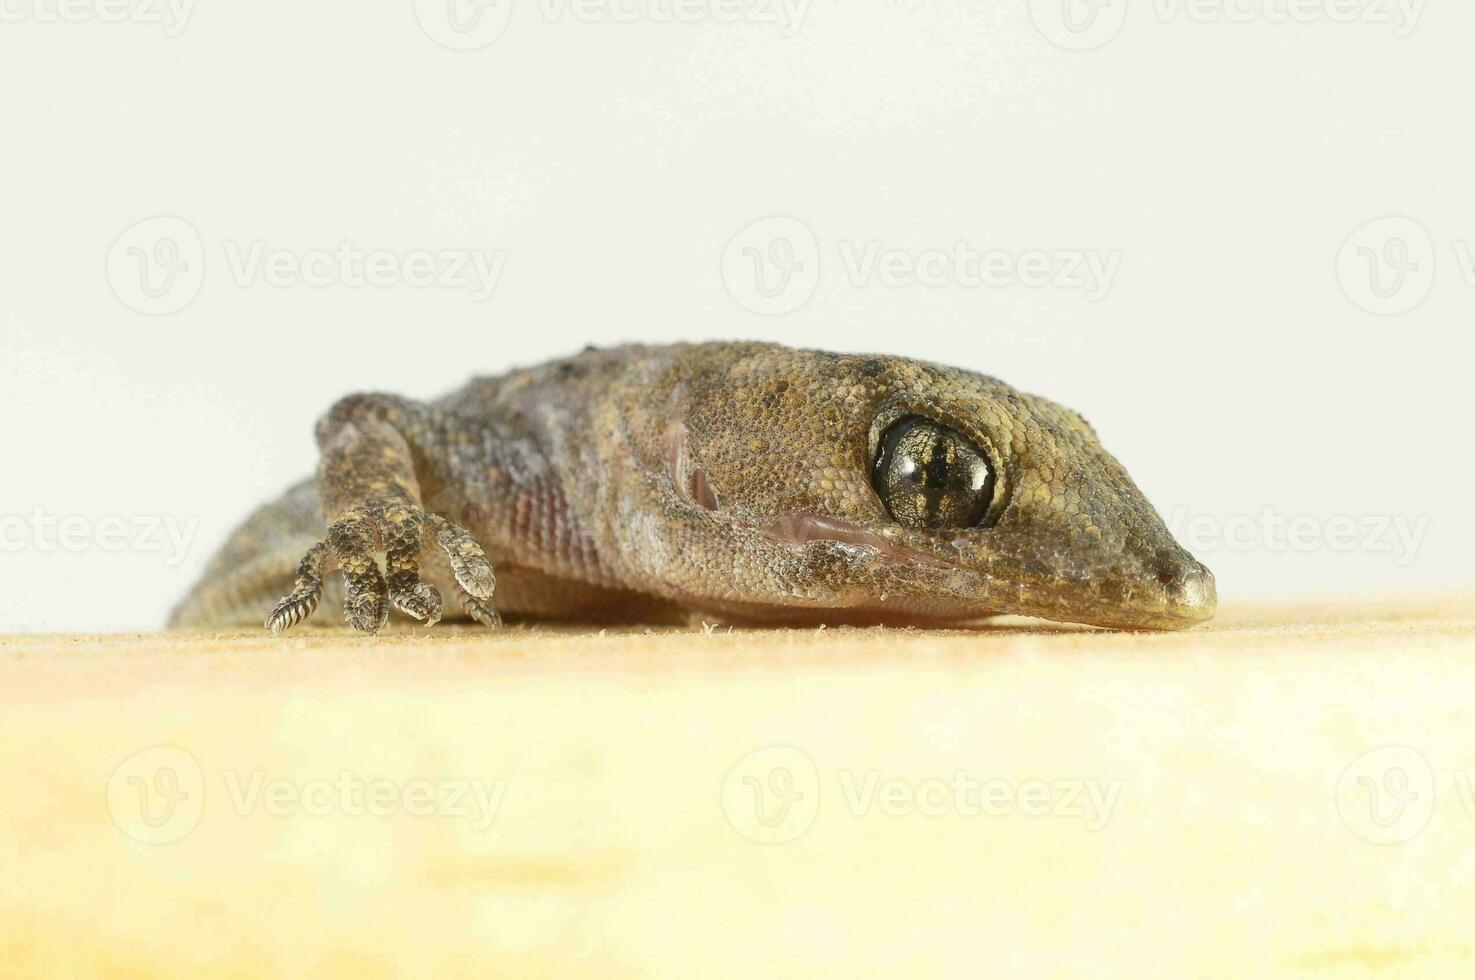 a small lizard sitting on top of a wooden surface photo